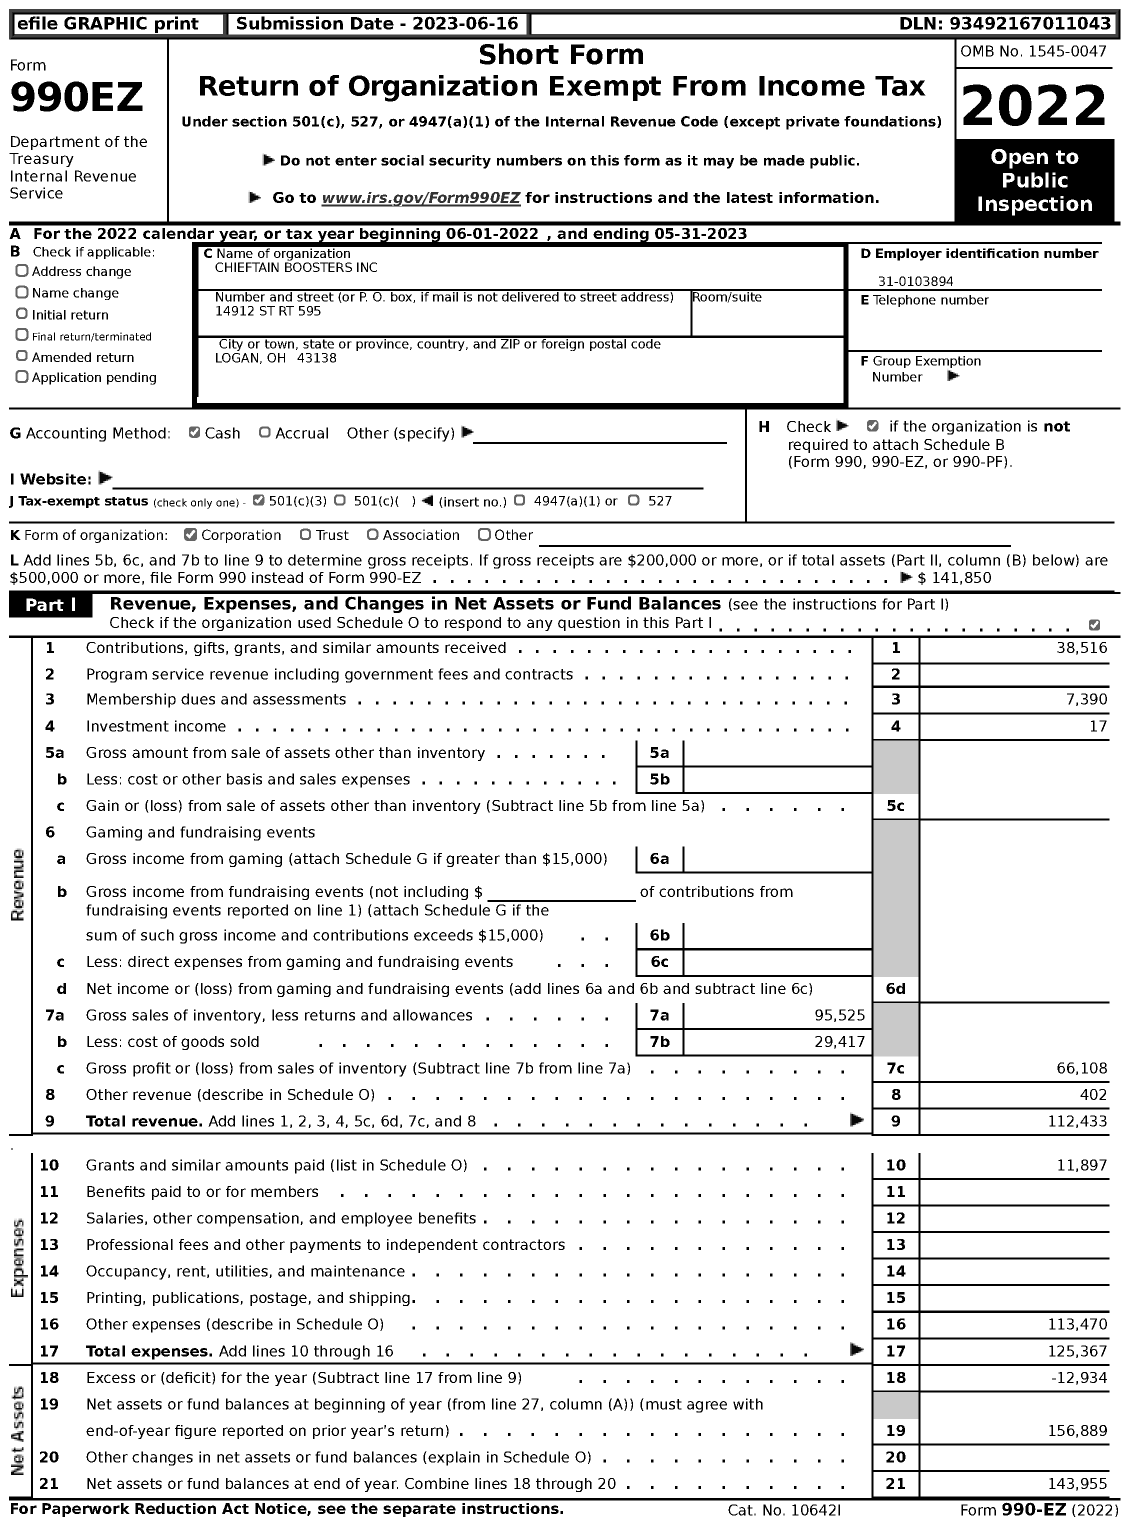 Image of first page of 2022 Form 990EZ for Chieftain Boosters